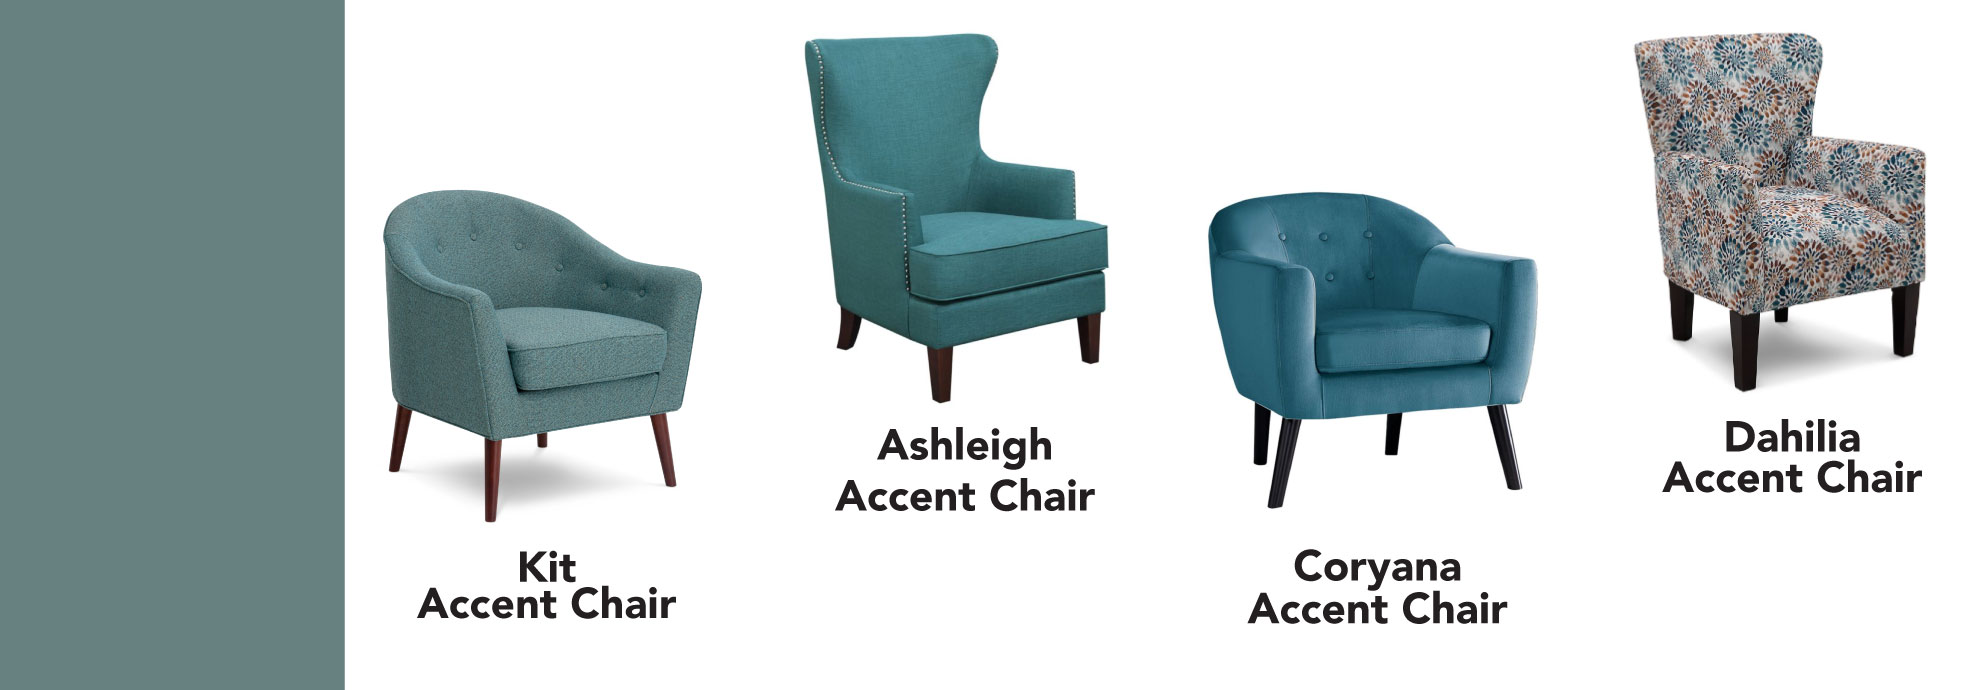 Teal Products at Furniture Row. Kit Accent Chair. Ashleigh Accent Chair. Coryana Accent Chair. Dahlia Accent Chair.